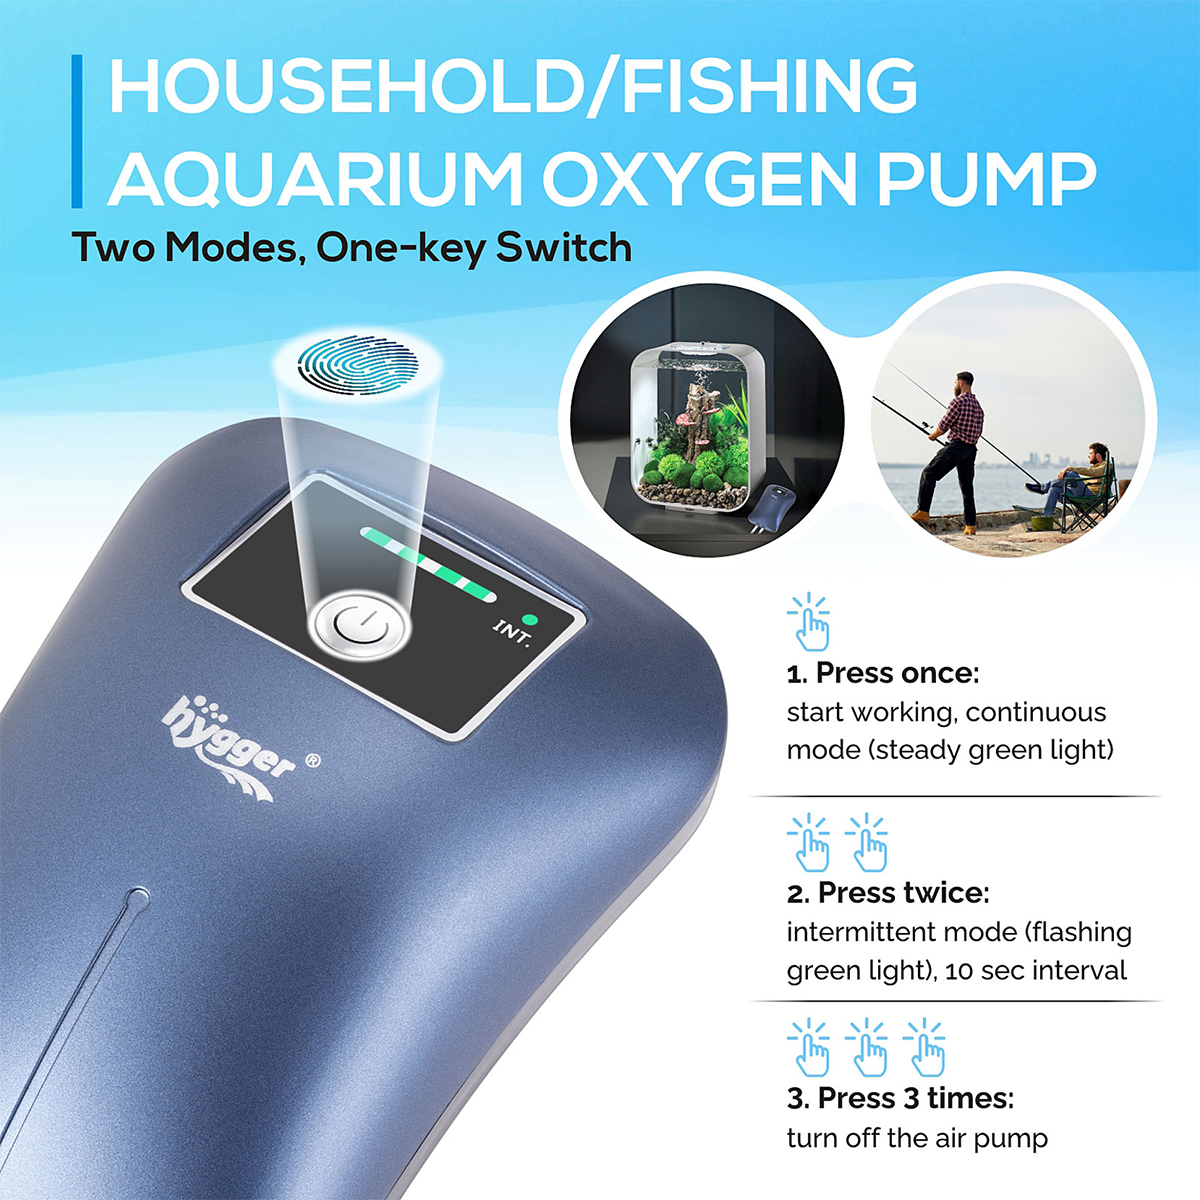 hygger Rechargeable Aquarium Pond Powerful Air Pump for Fishing